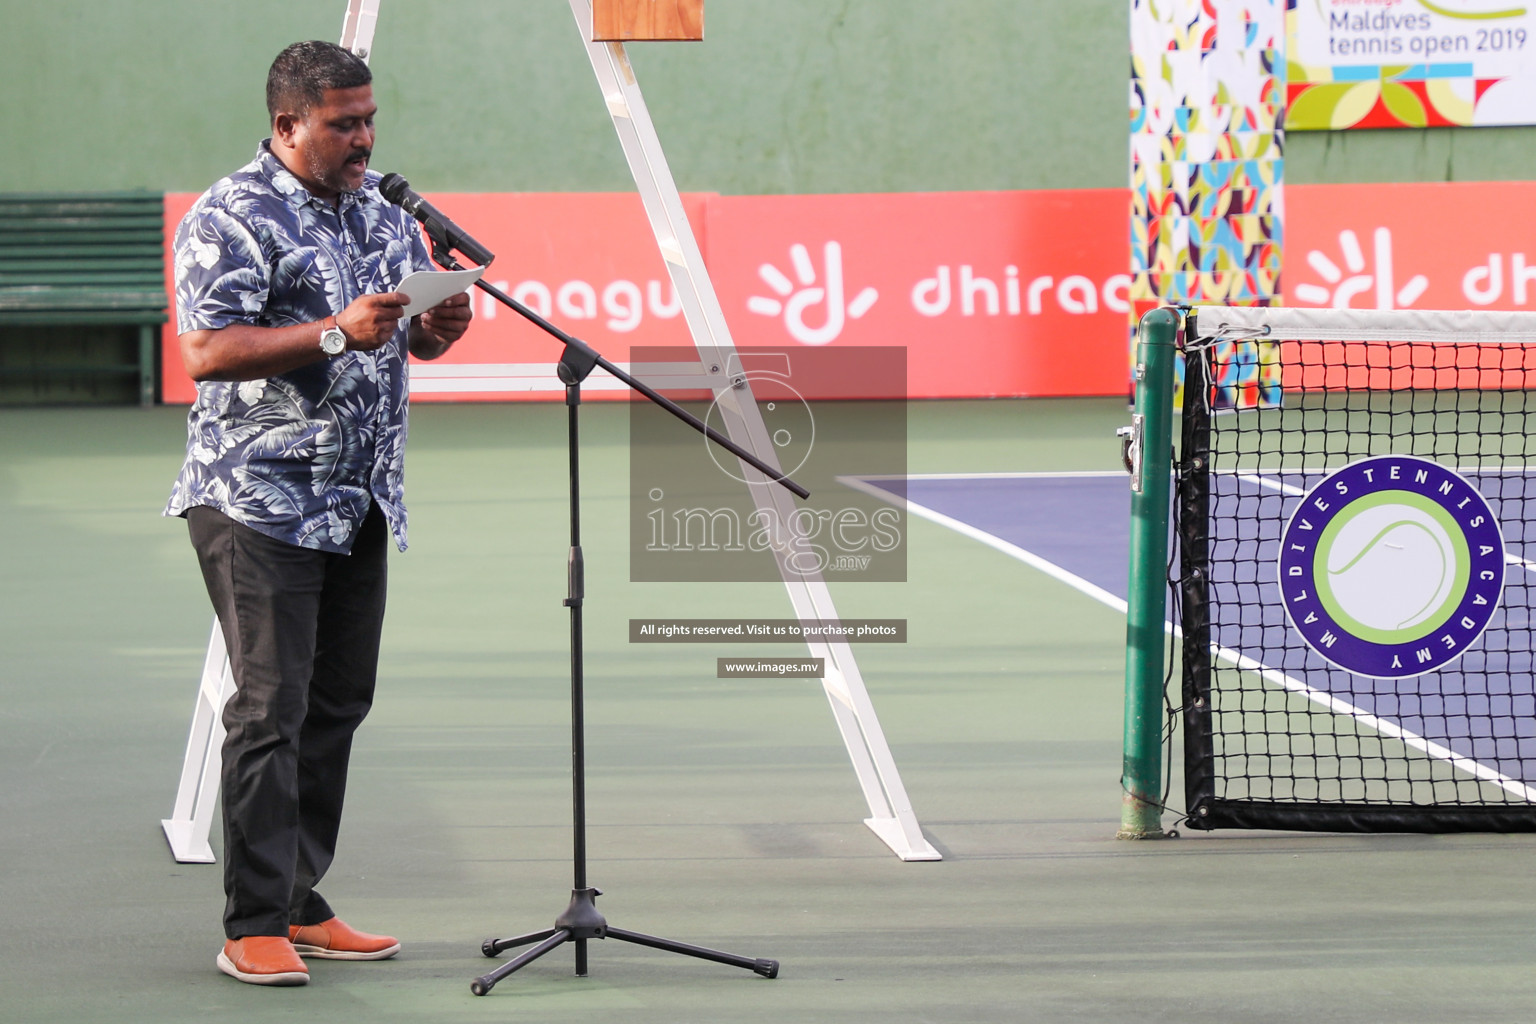 Opening ceremony of Dhiraagu Maldives Tennis Open 2019 was held on Saturday, 7th September 2019 at Male', Maldives. Photos: Ismail Thoriq / images.mv